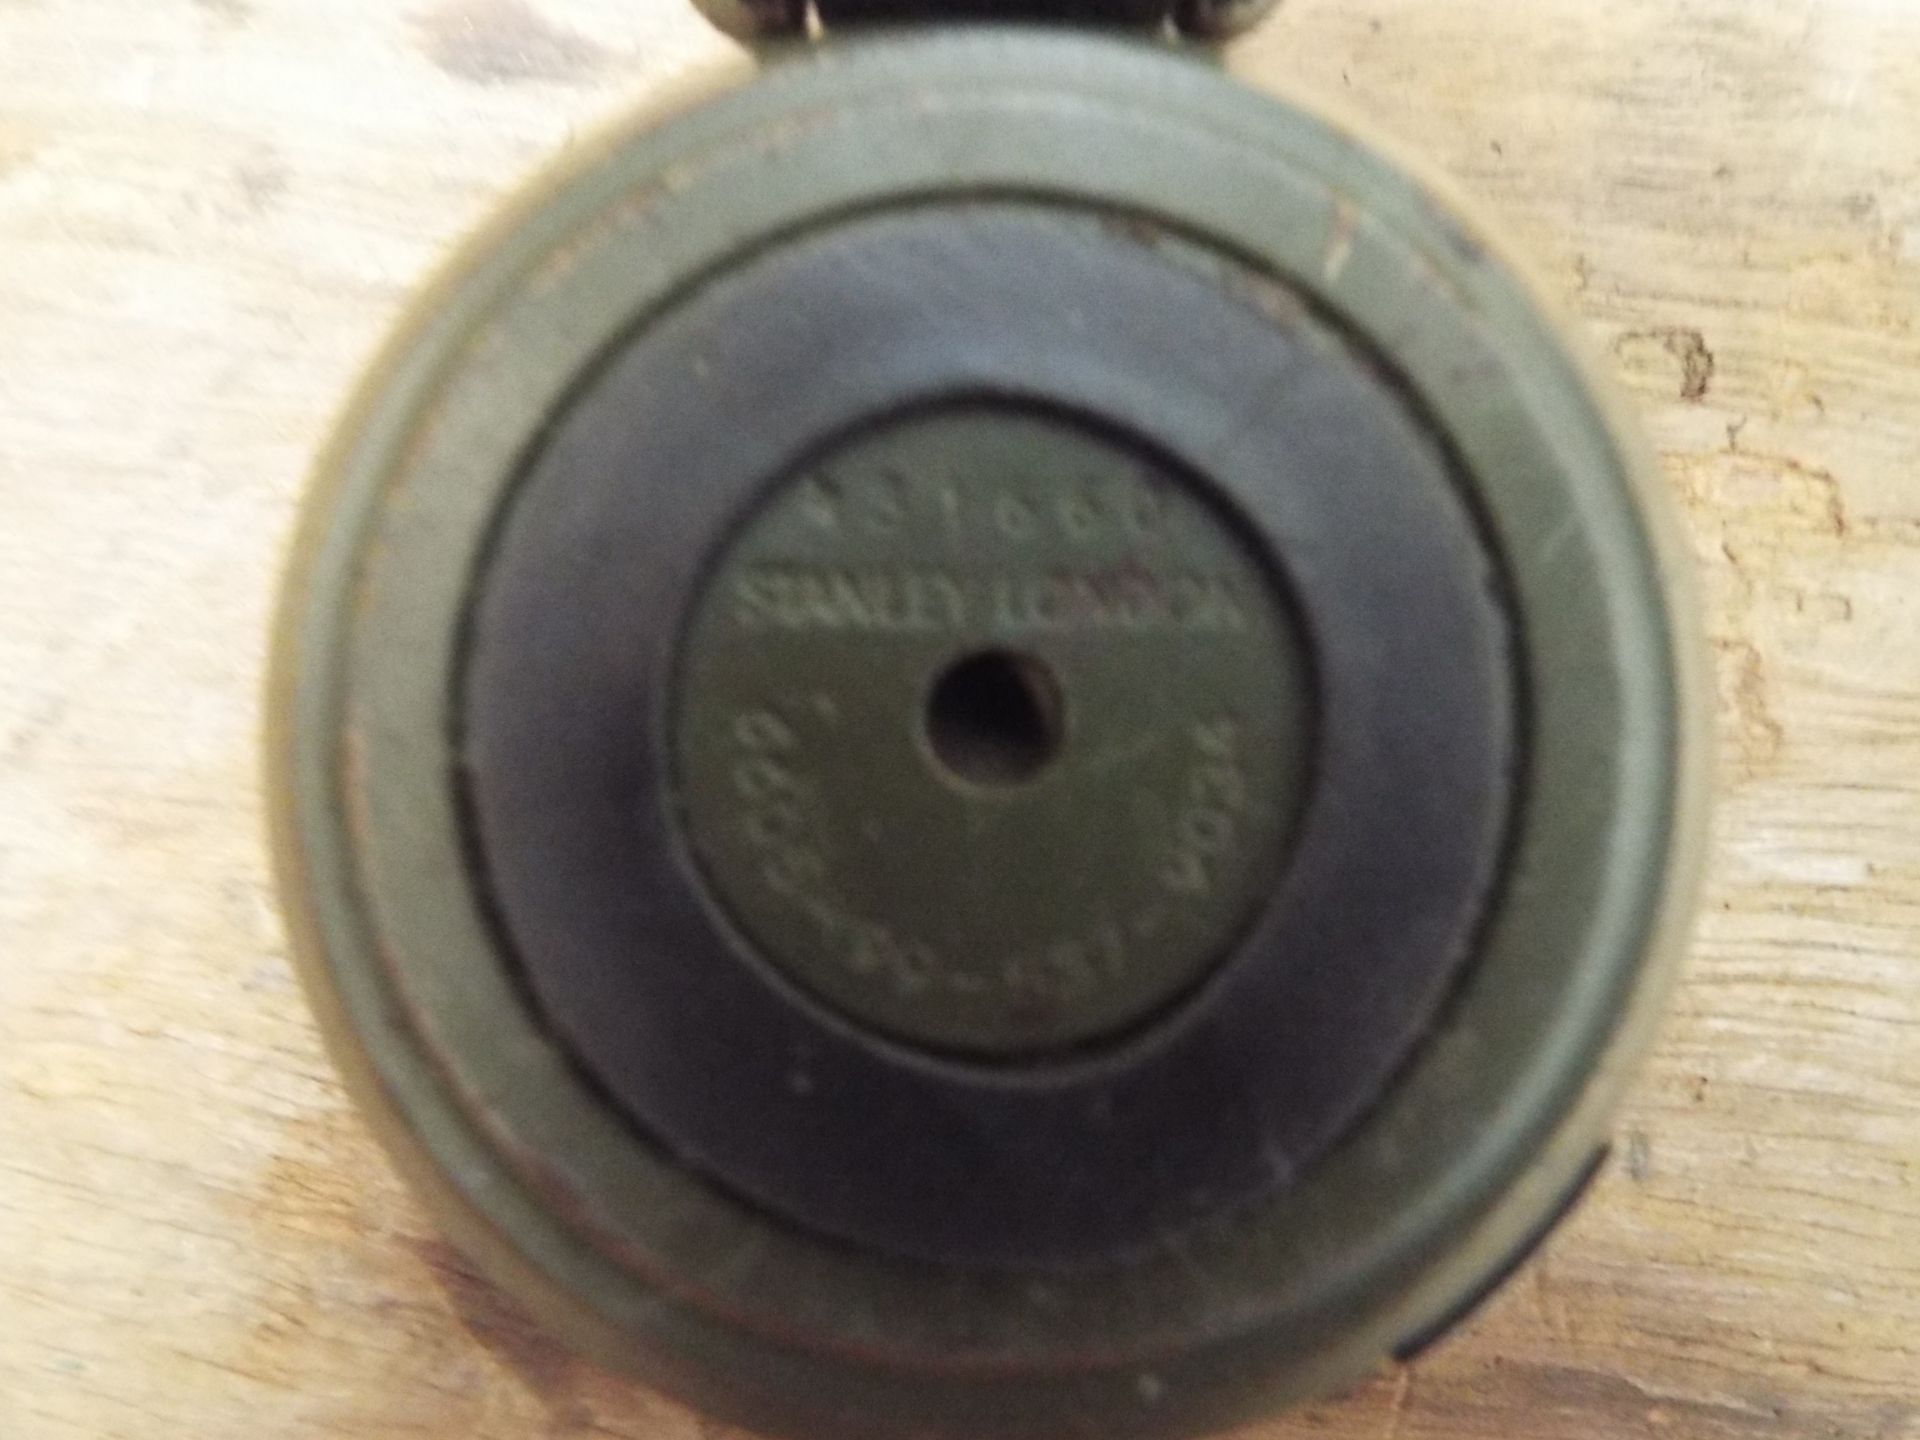 Genuine British Army Stanley Prismatic Marching Compass - Image 4 of 4